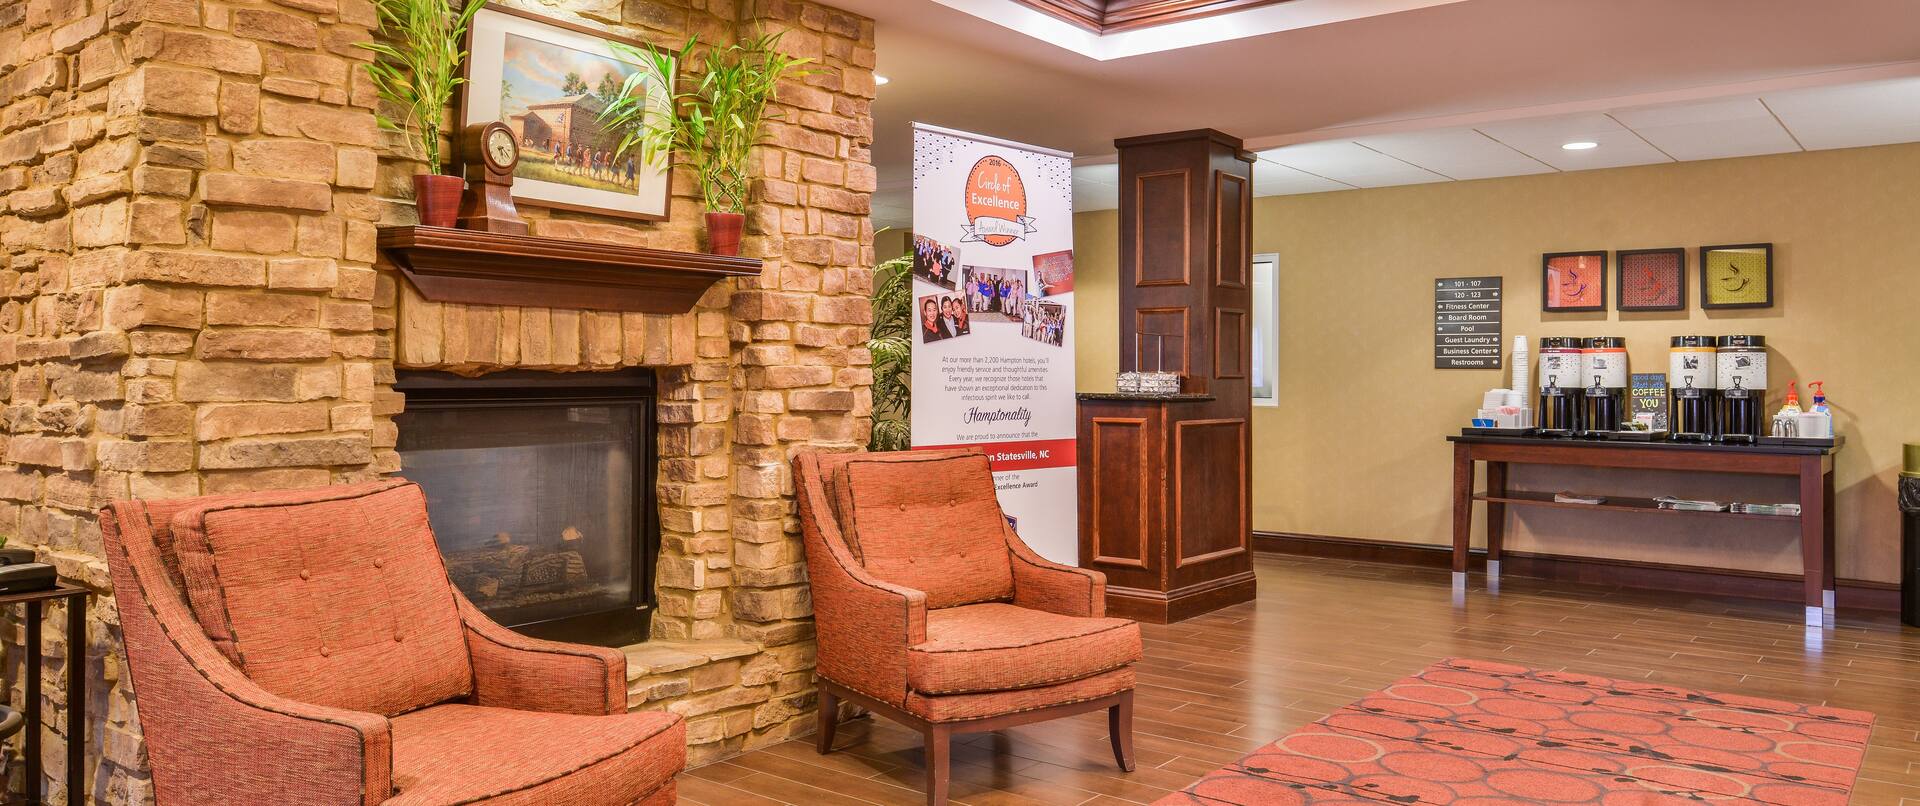 Lobby Seating with Fireplace and Coffee